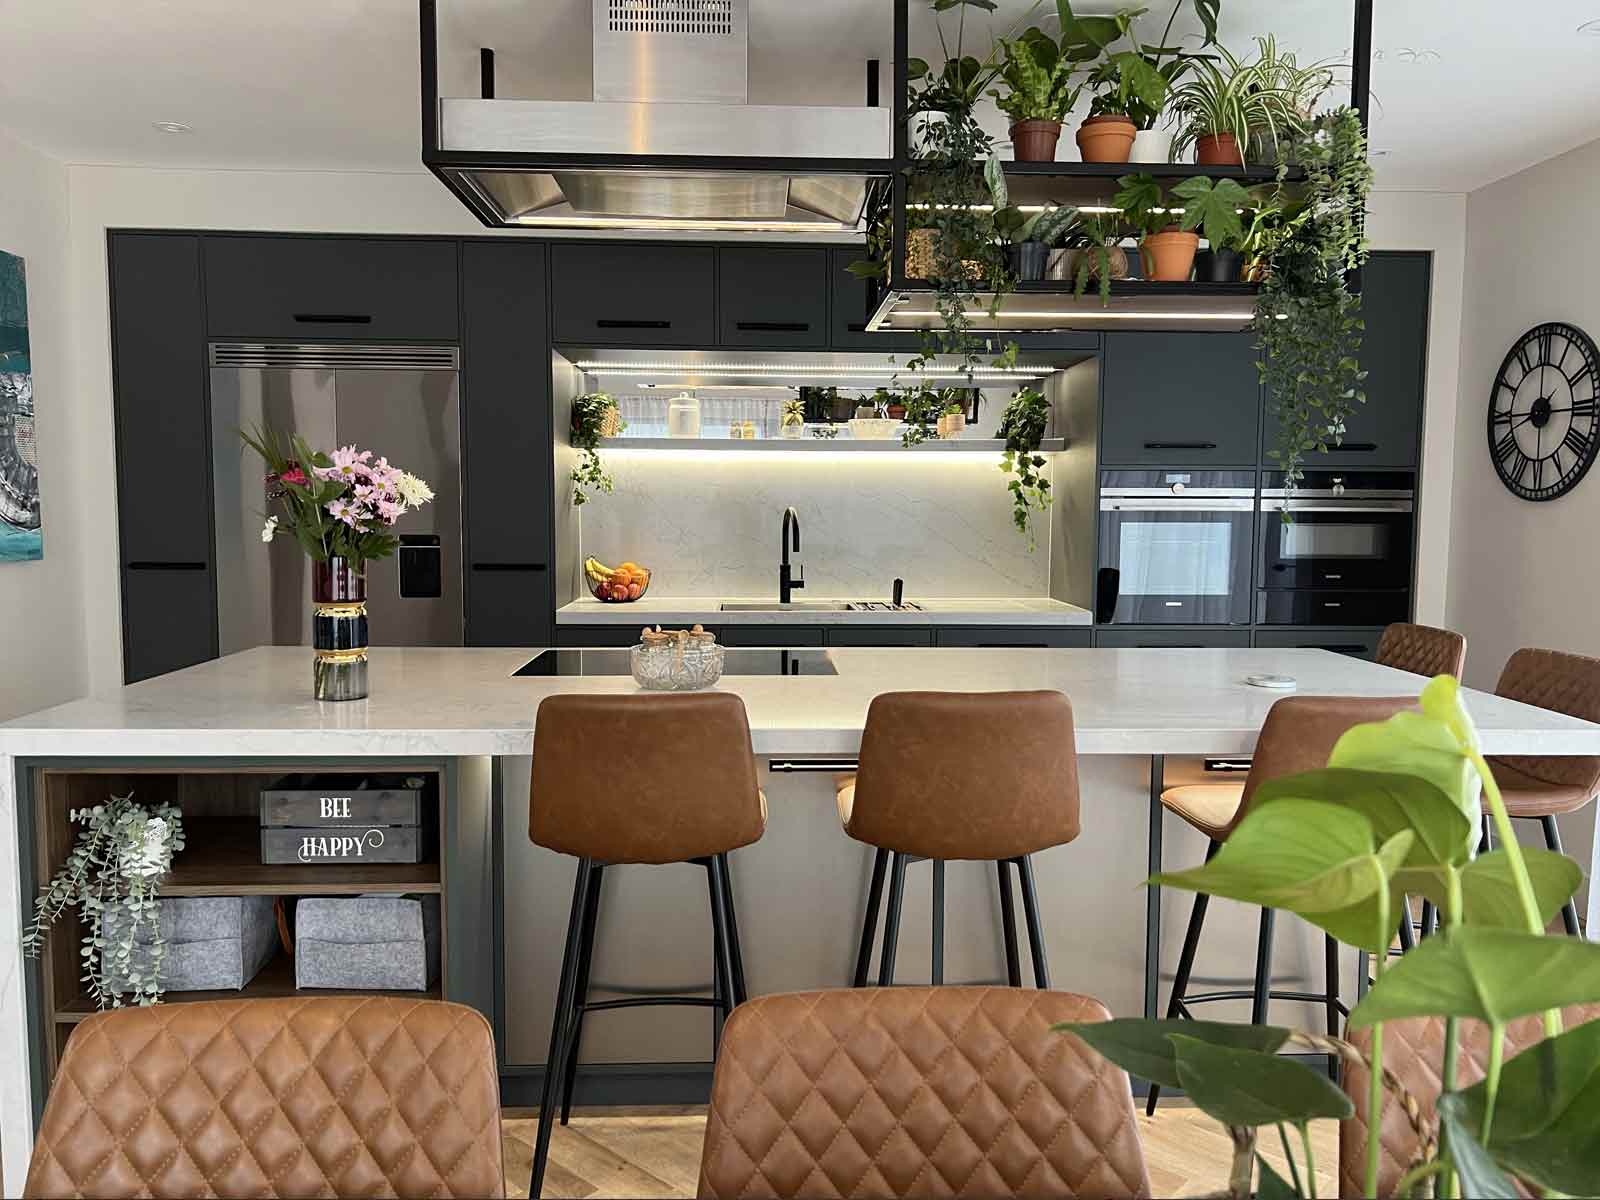 A kitchen characterised by biophilic design, including plant usage